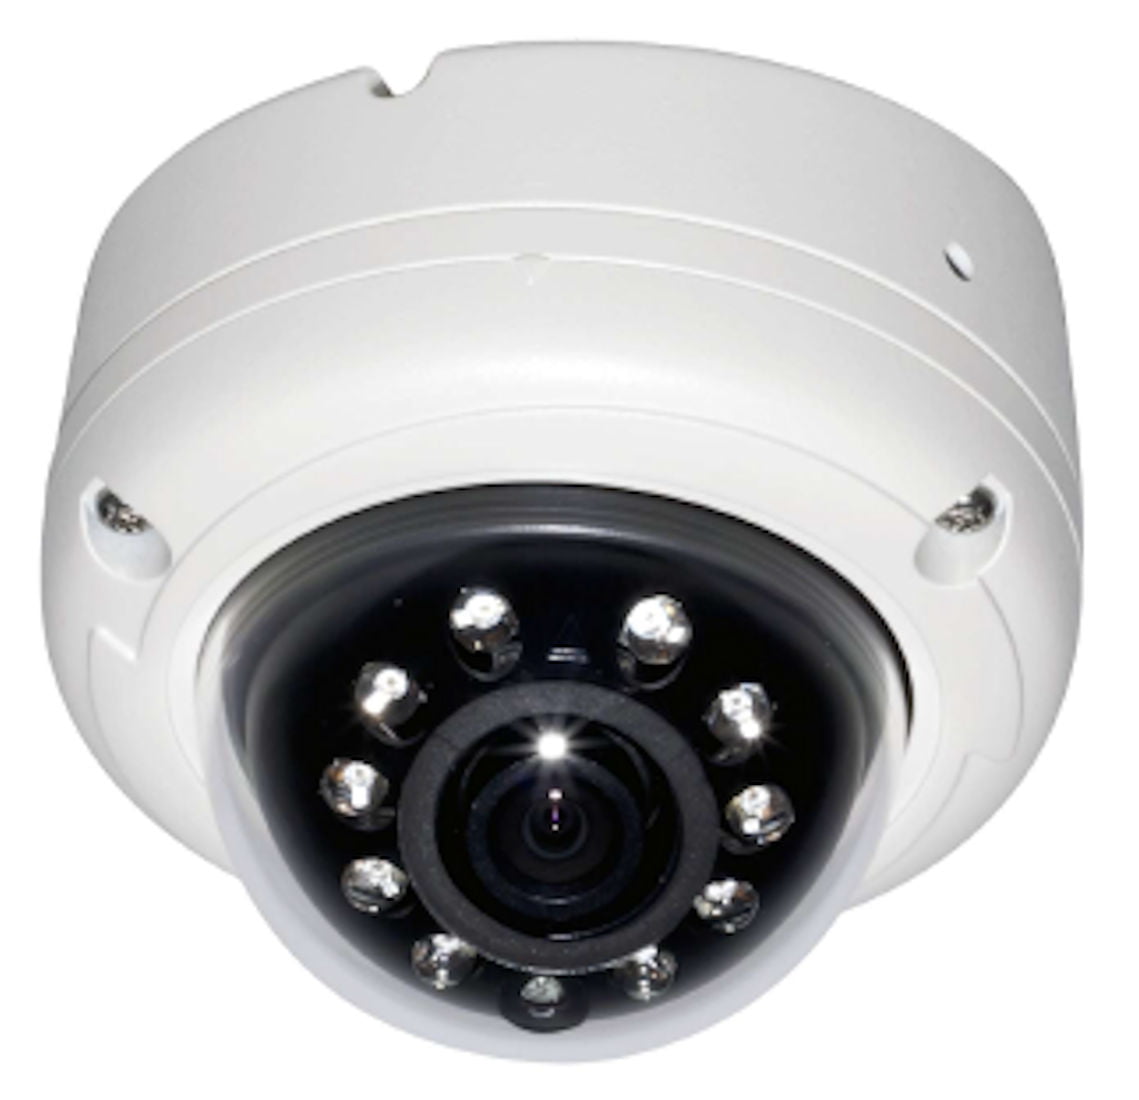 Eyemax IA-6110 Aces 650TVL Small Size Infrared IP68 Camera with 3.6 mm Lens Surface Mount